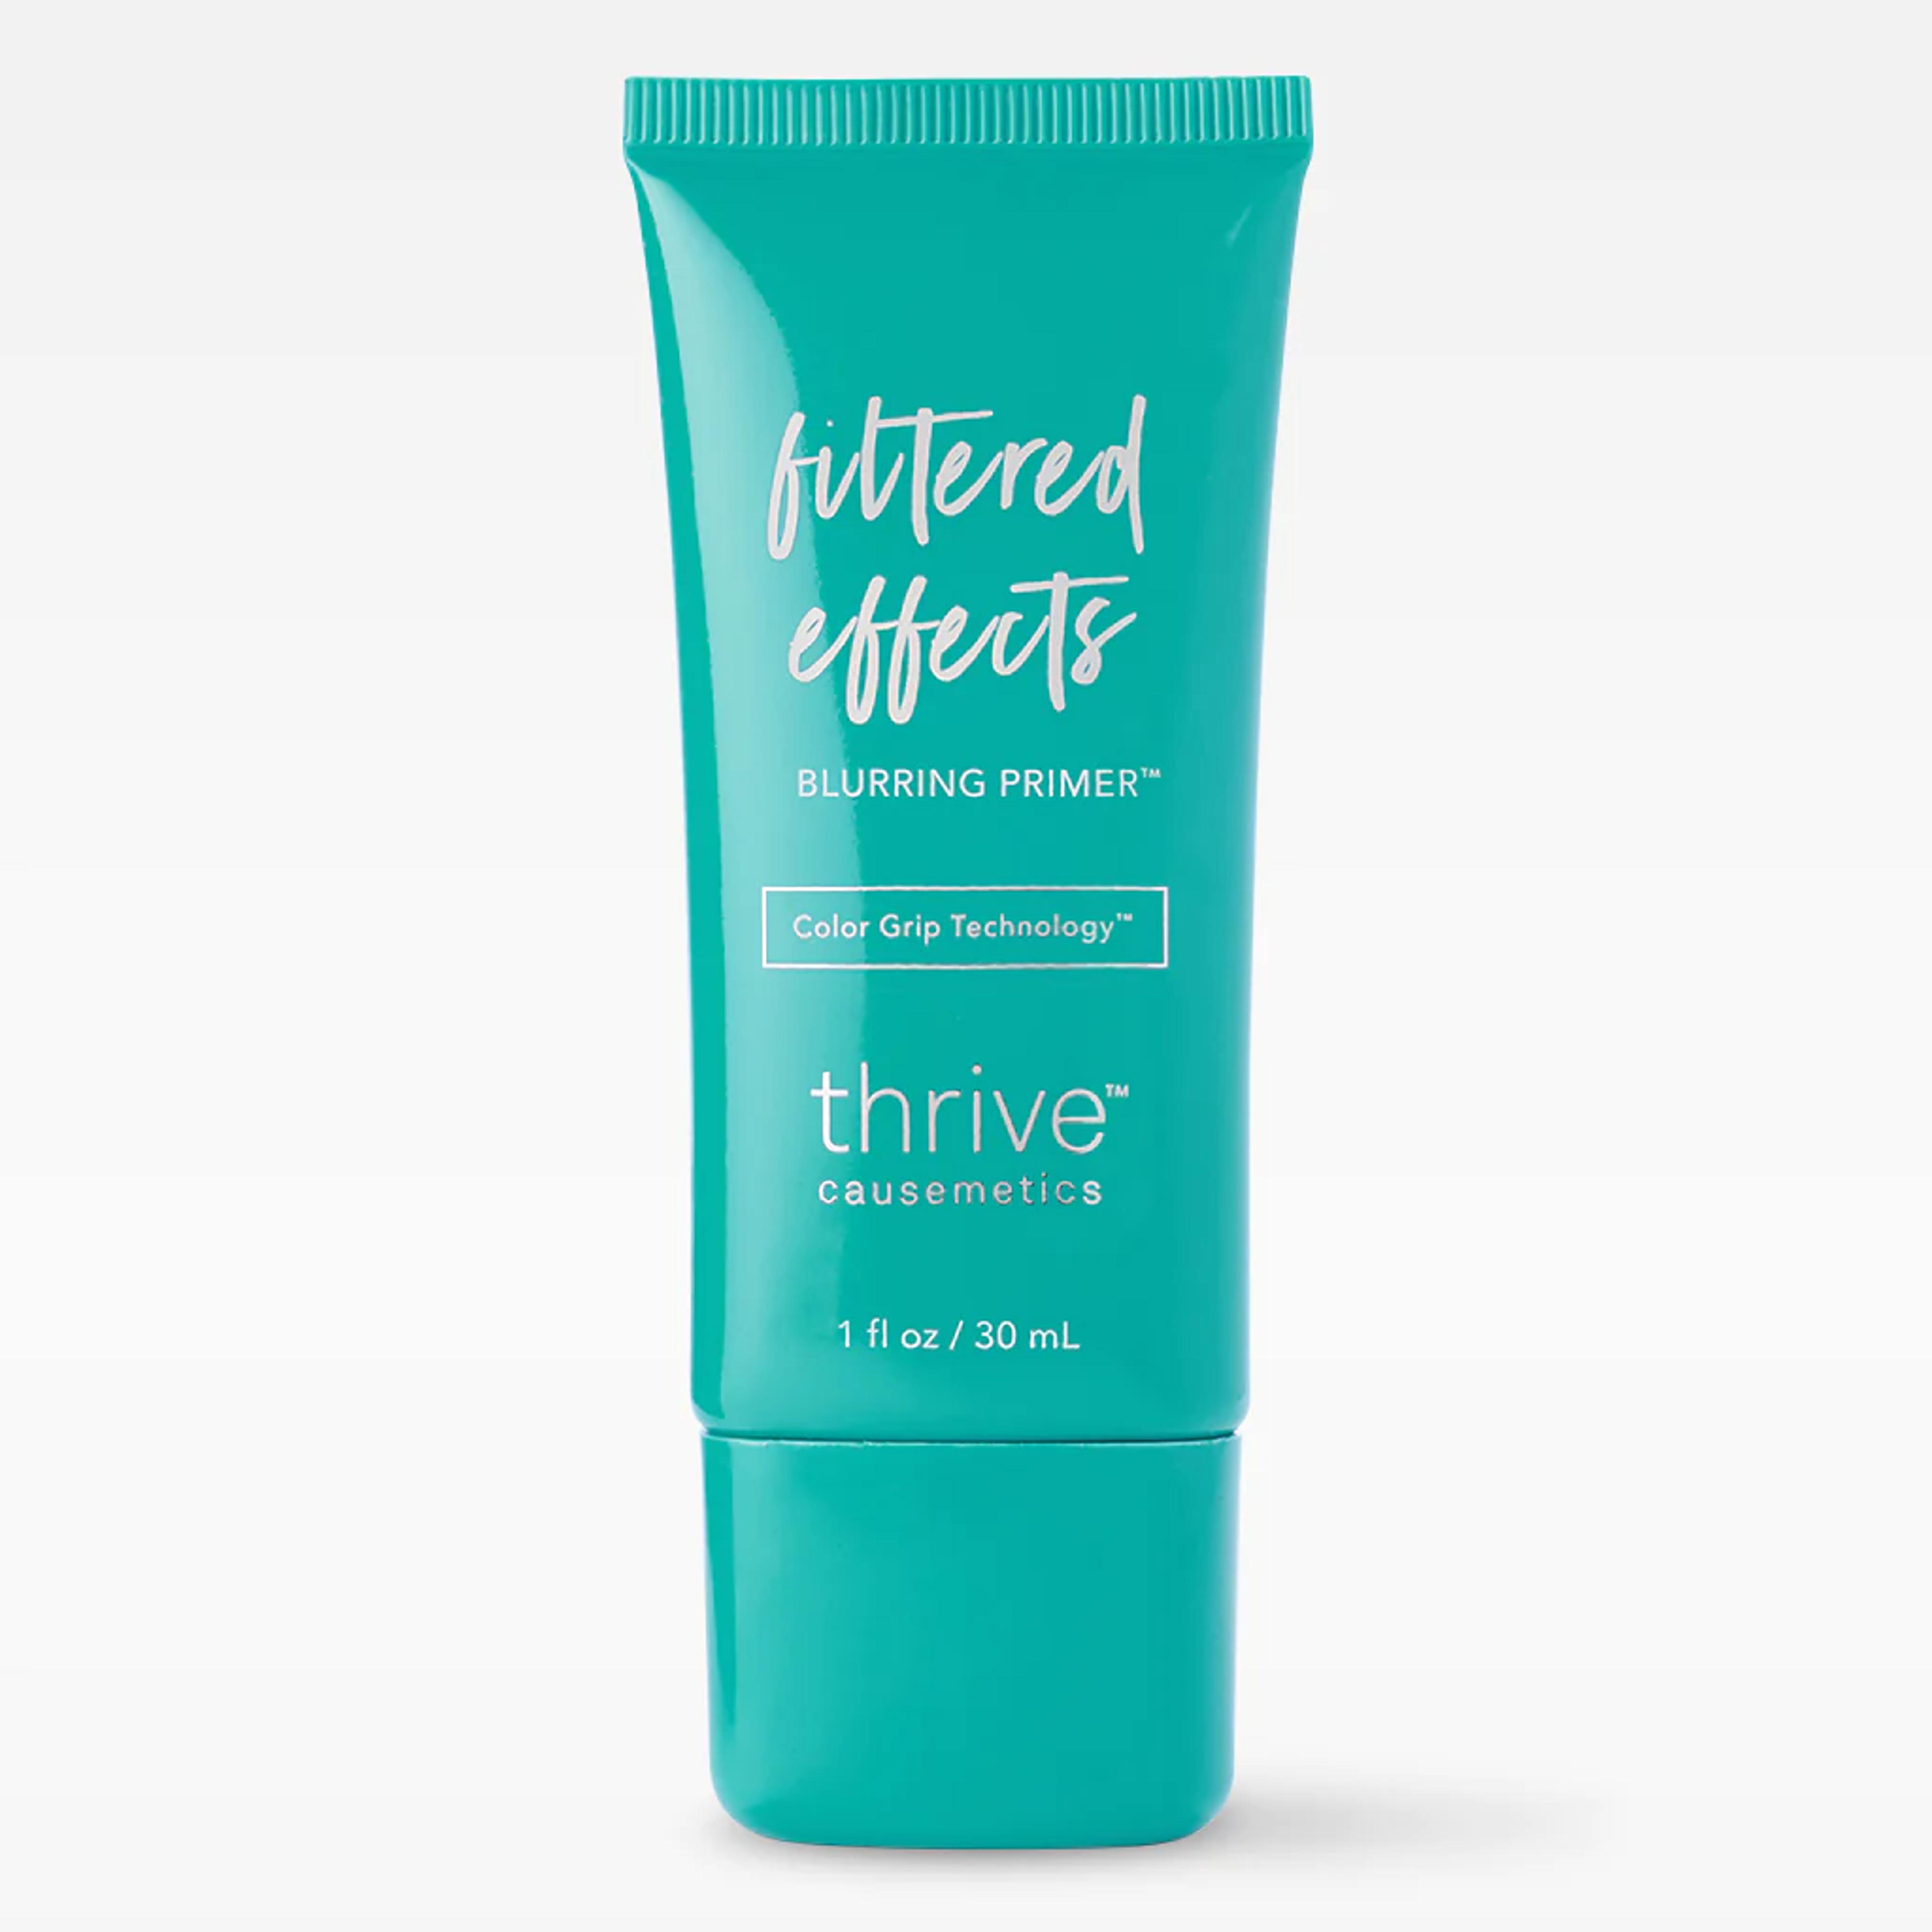 thrivecausemetics.com/products/filtered-effects-blurring-primer